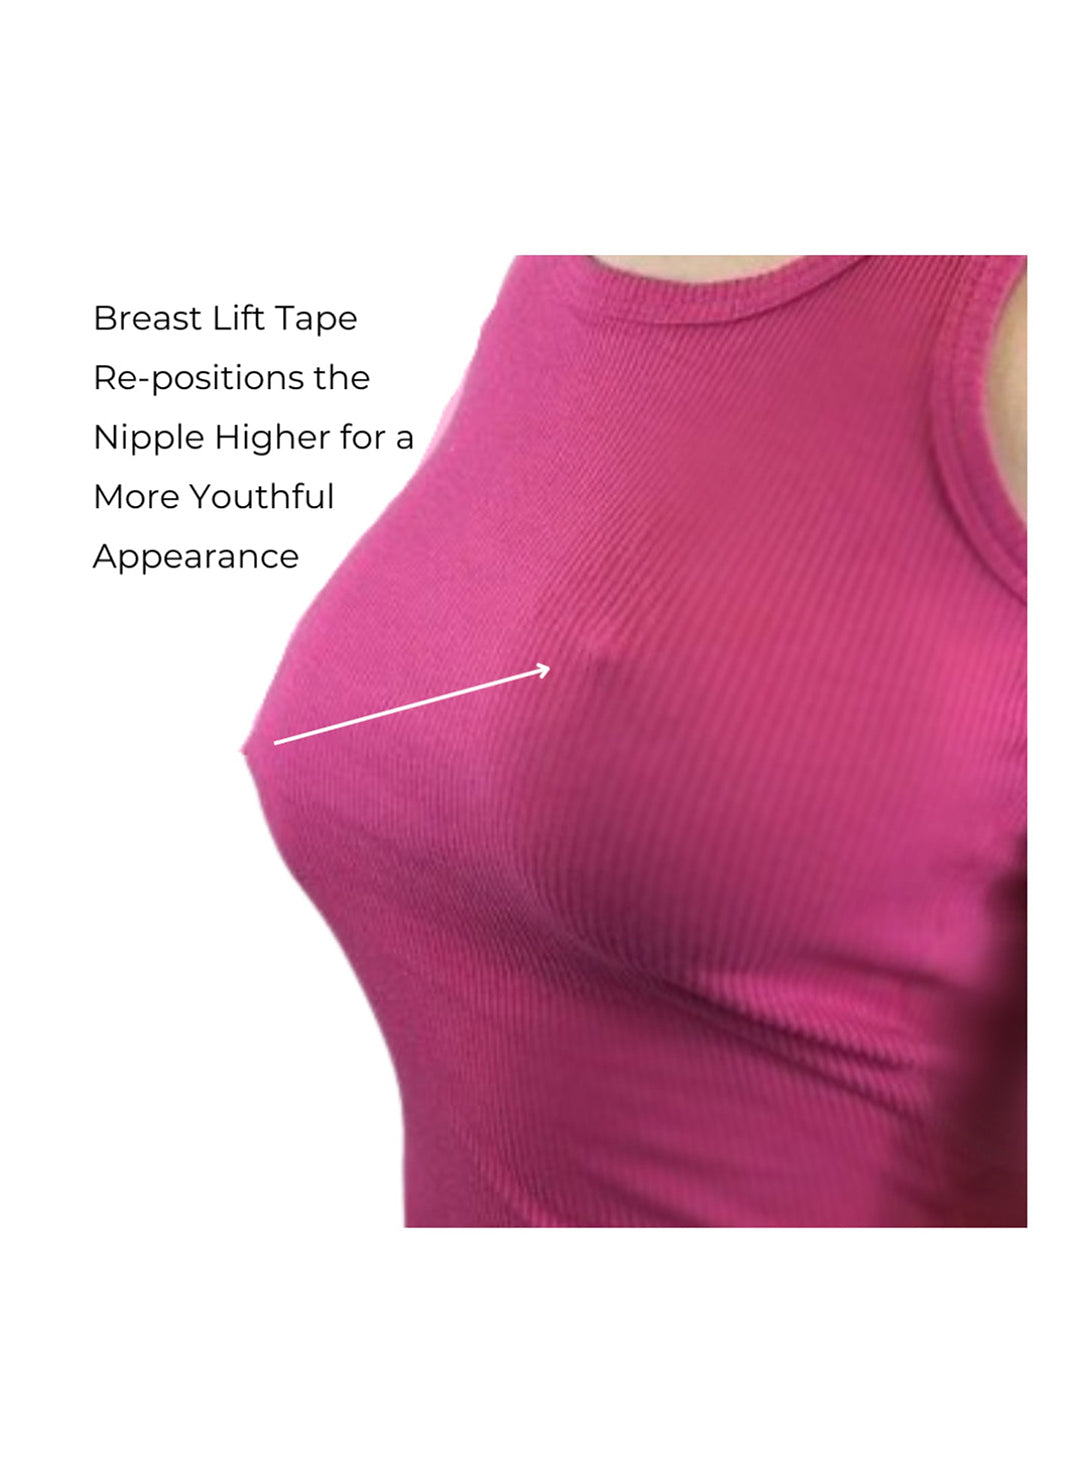 Bring It Up Instant Breast Lift